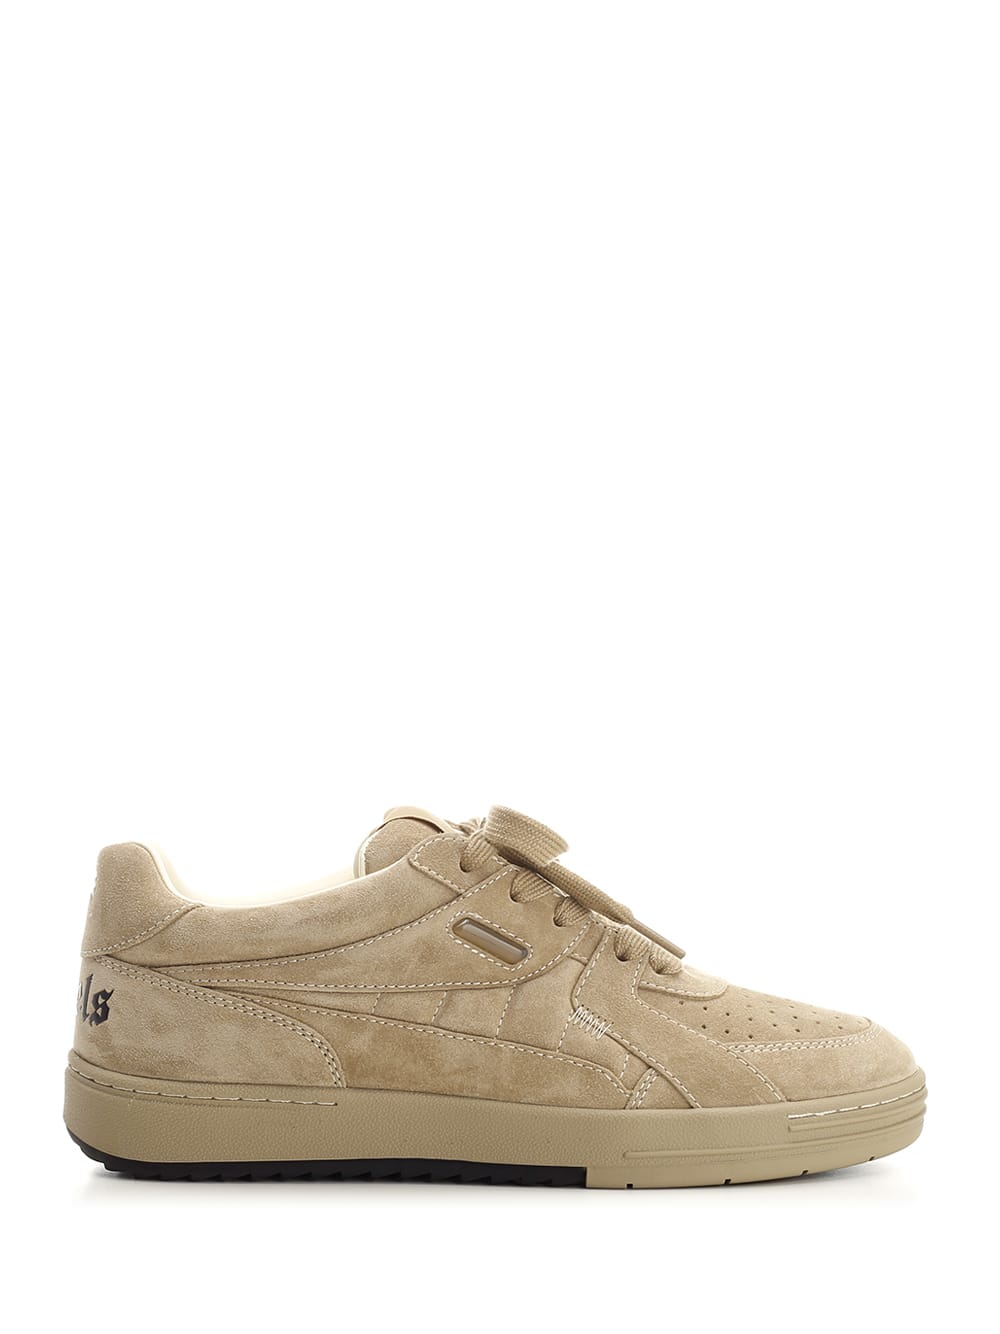 PALM ANGELS SUEDE UNIVESITY trainers